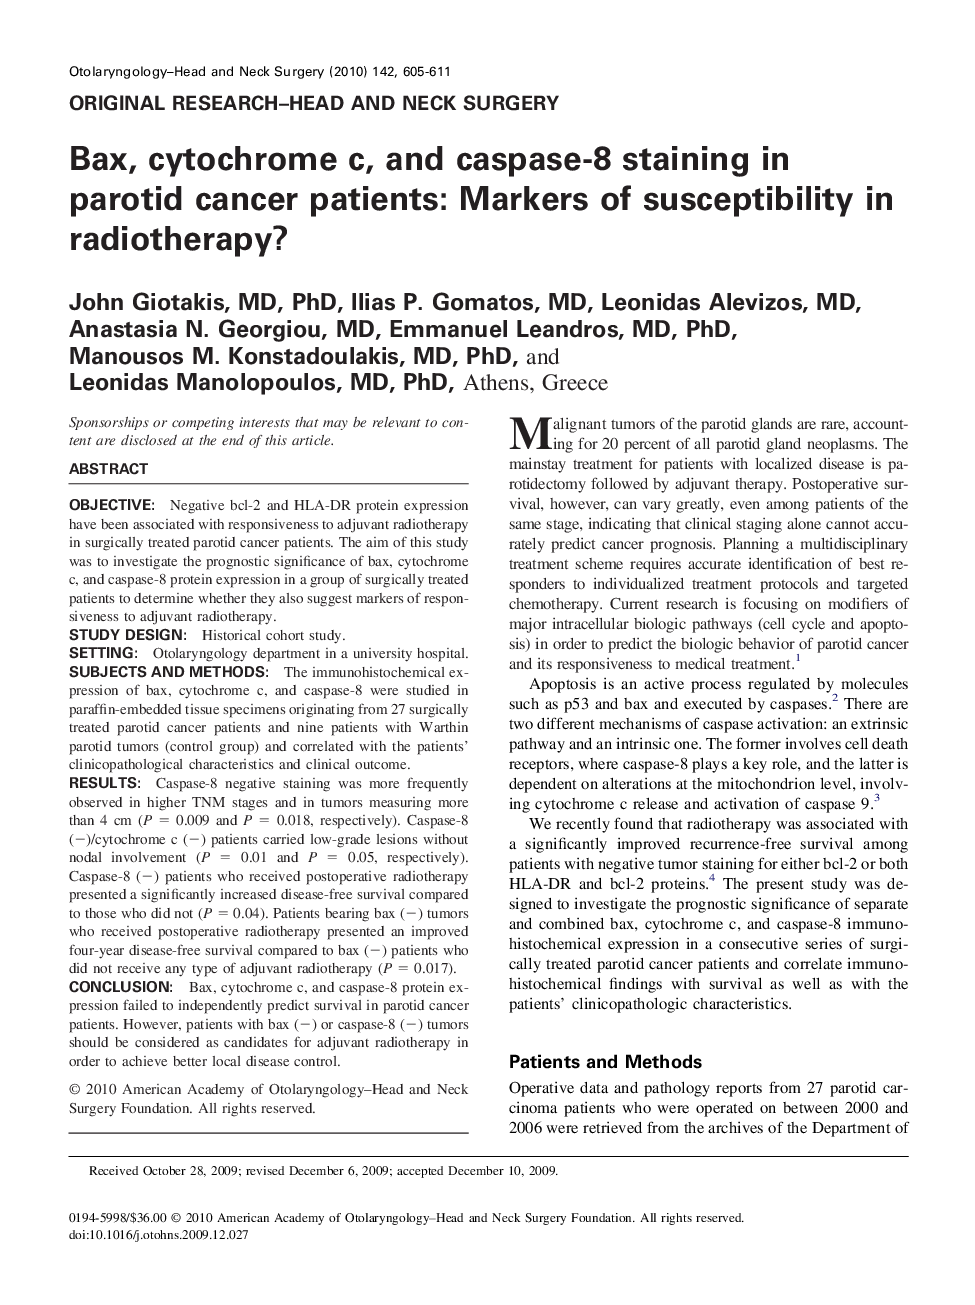 Bax, cytochrome c, and caspase-8 staining in parotid cancer patients: Markers of susceptibility in radiotherapy?